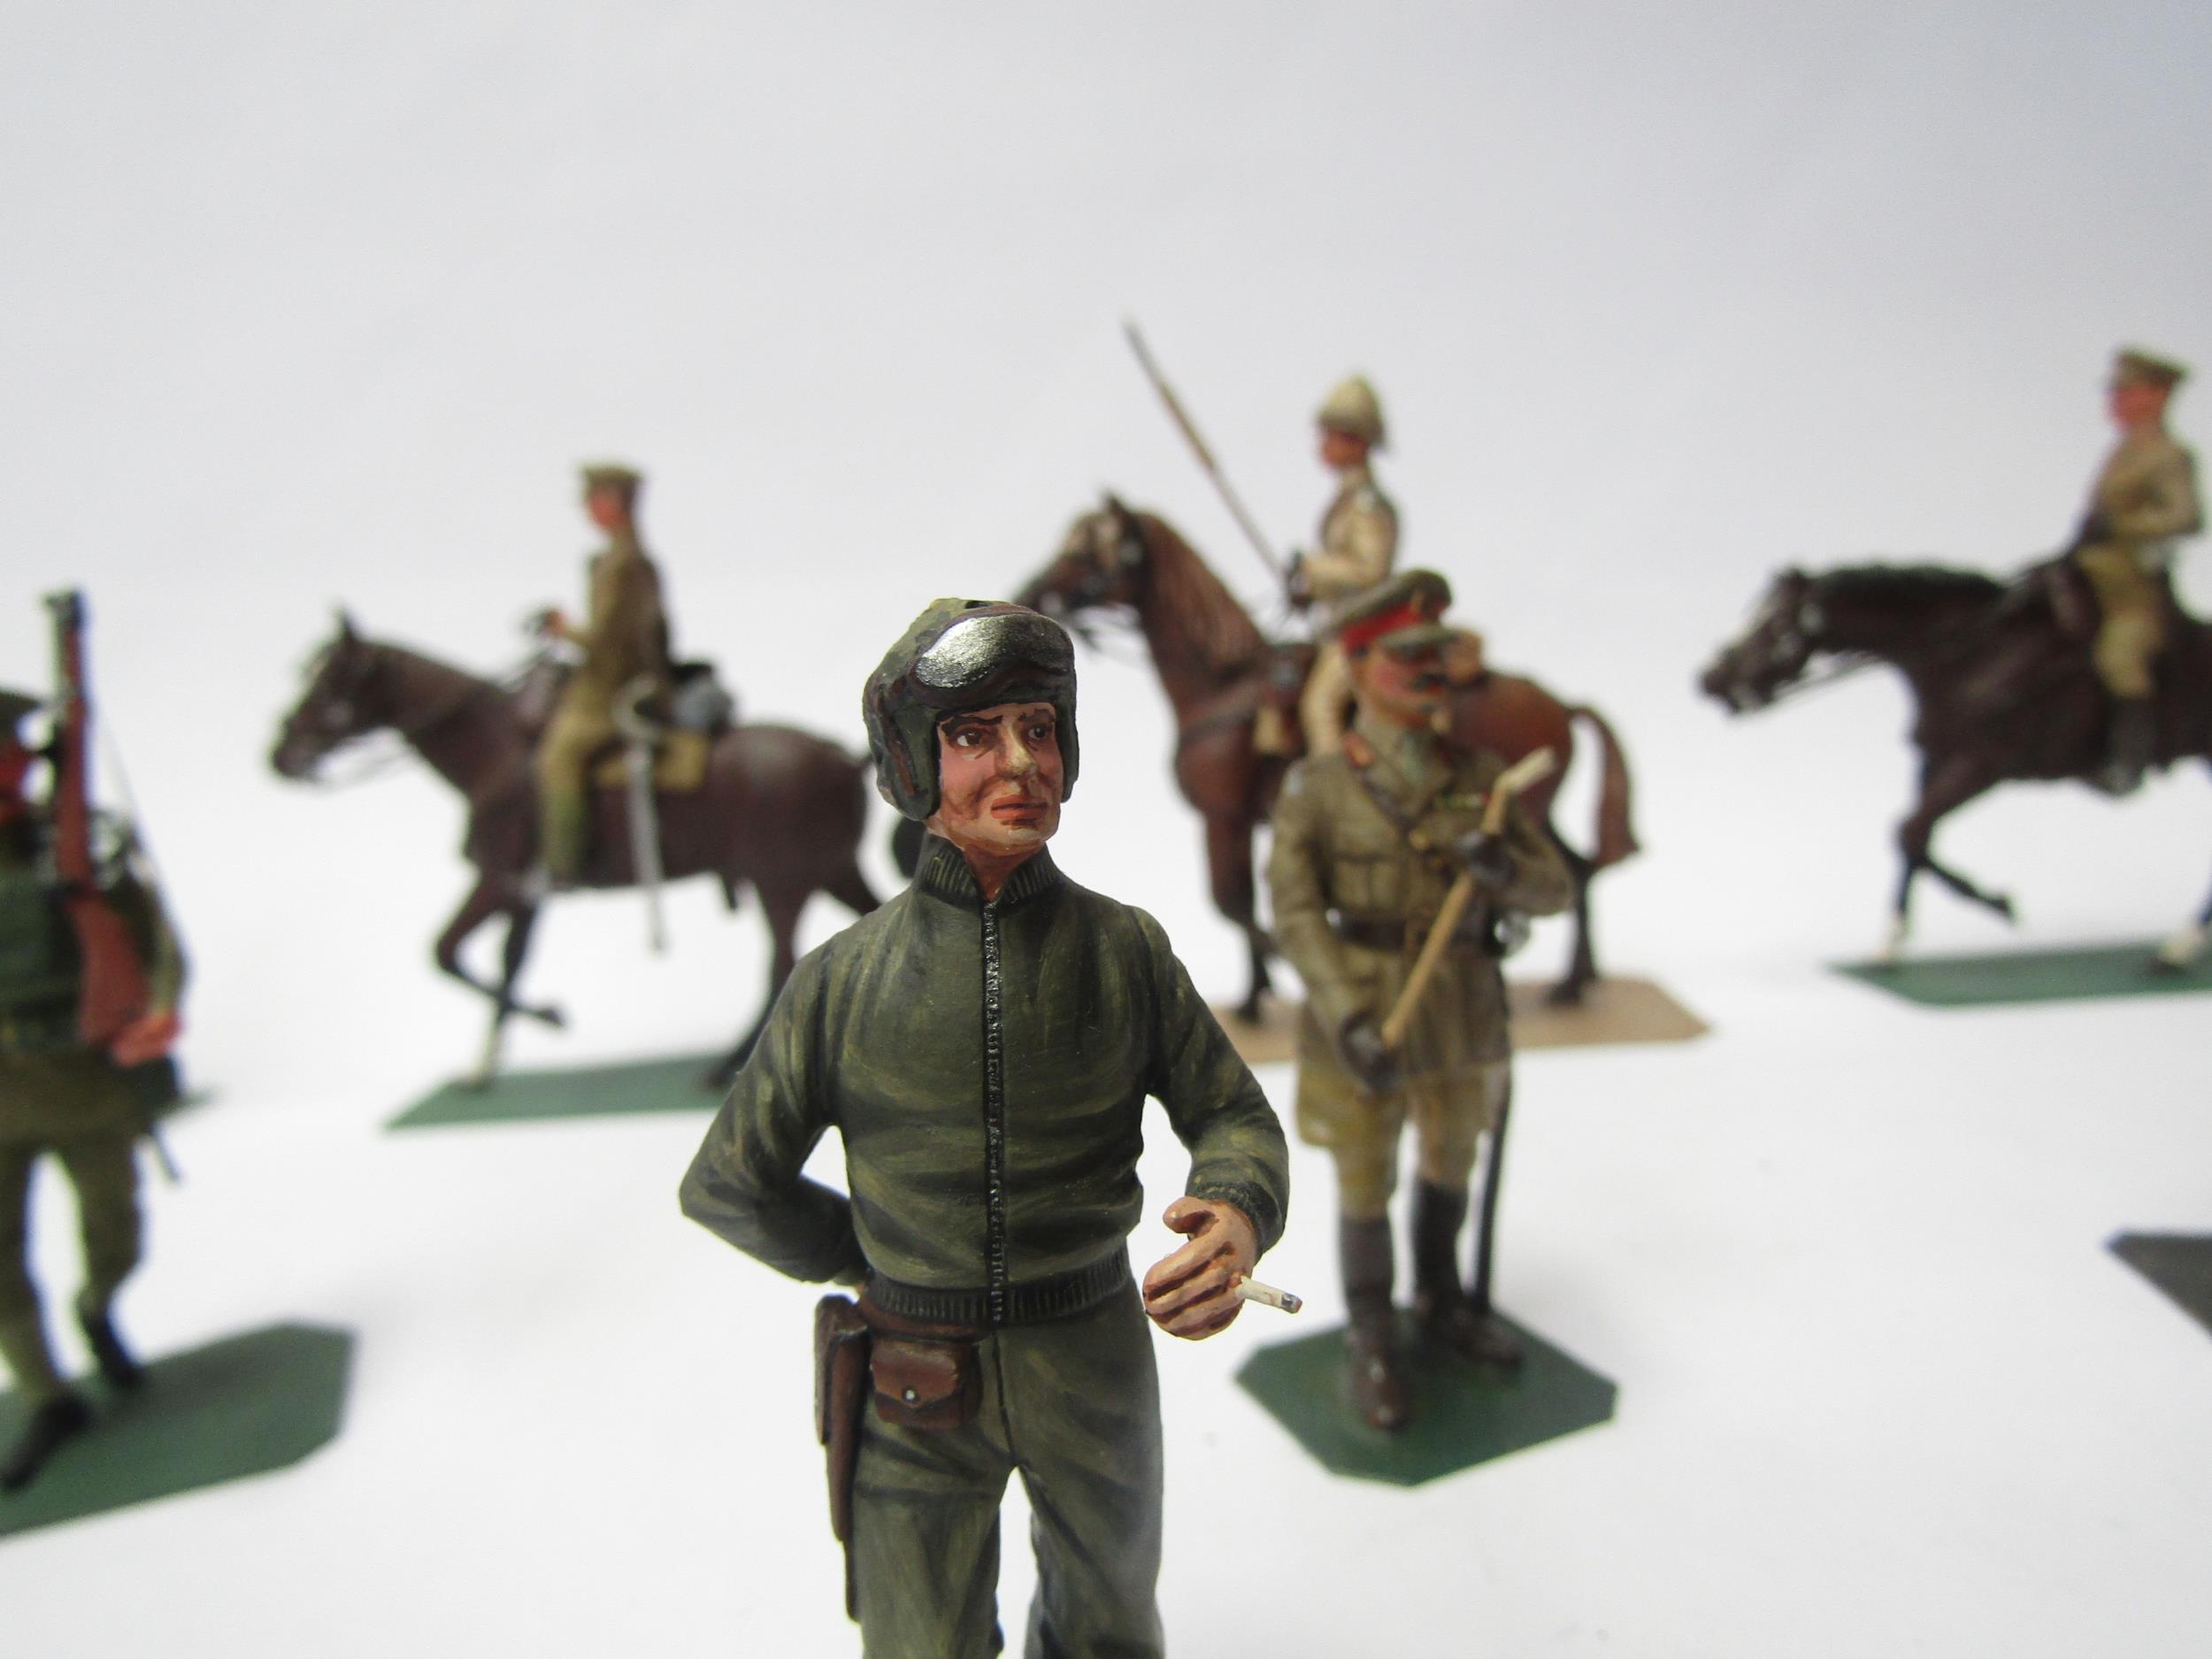 A collection of lead figures of WW1 era British Army servicemen including mounted officers and - Image 3 of 5